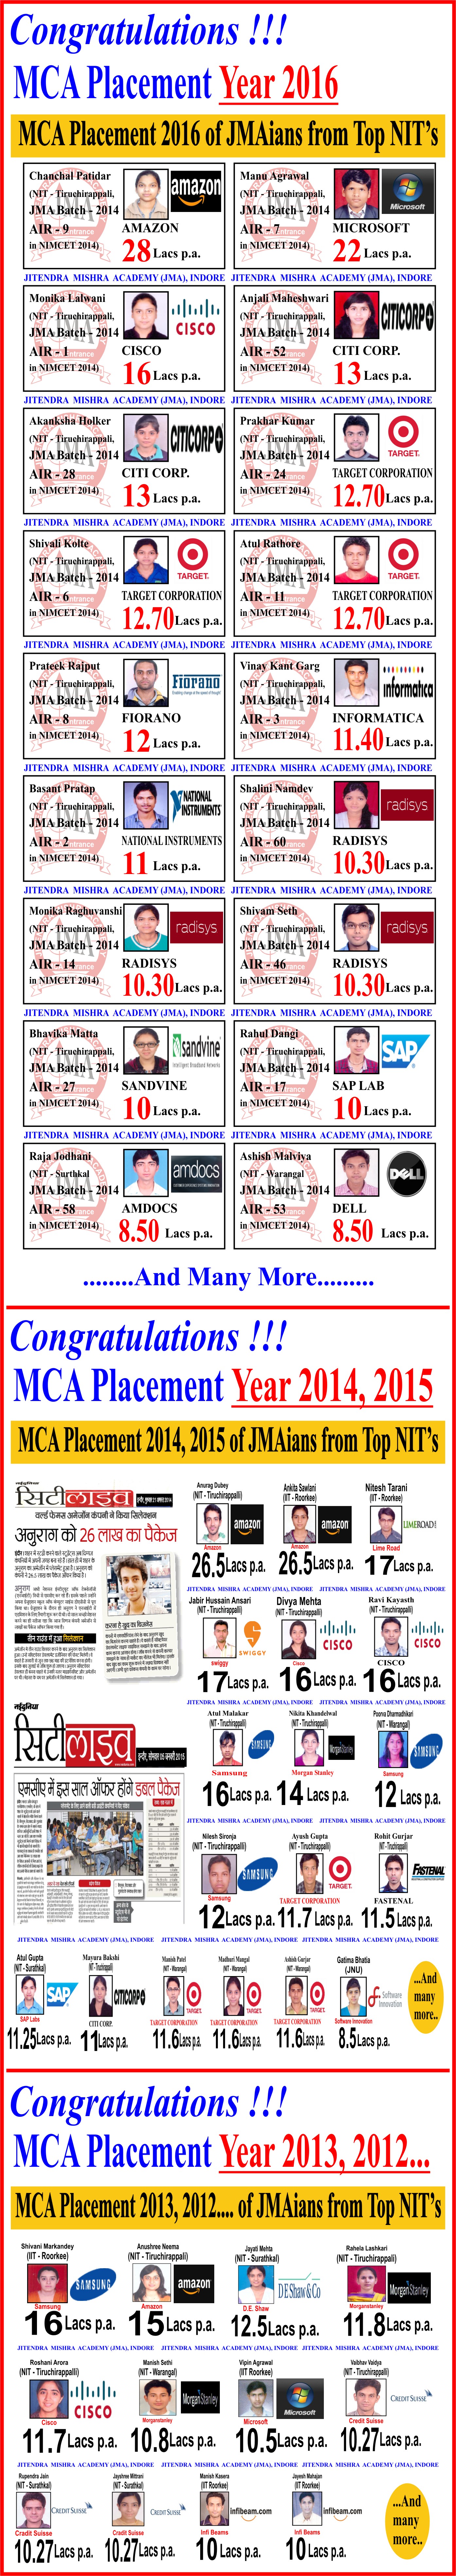 MCA PLACEMENT 2016 (for web)